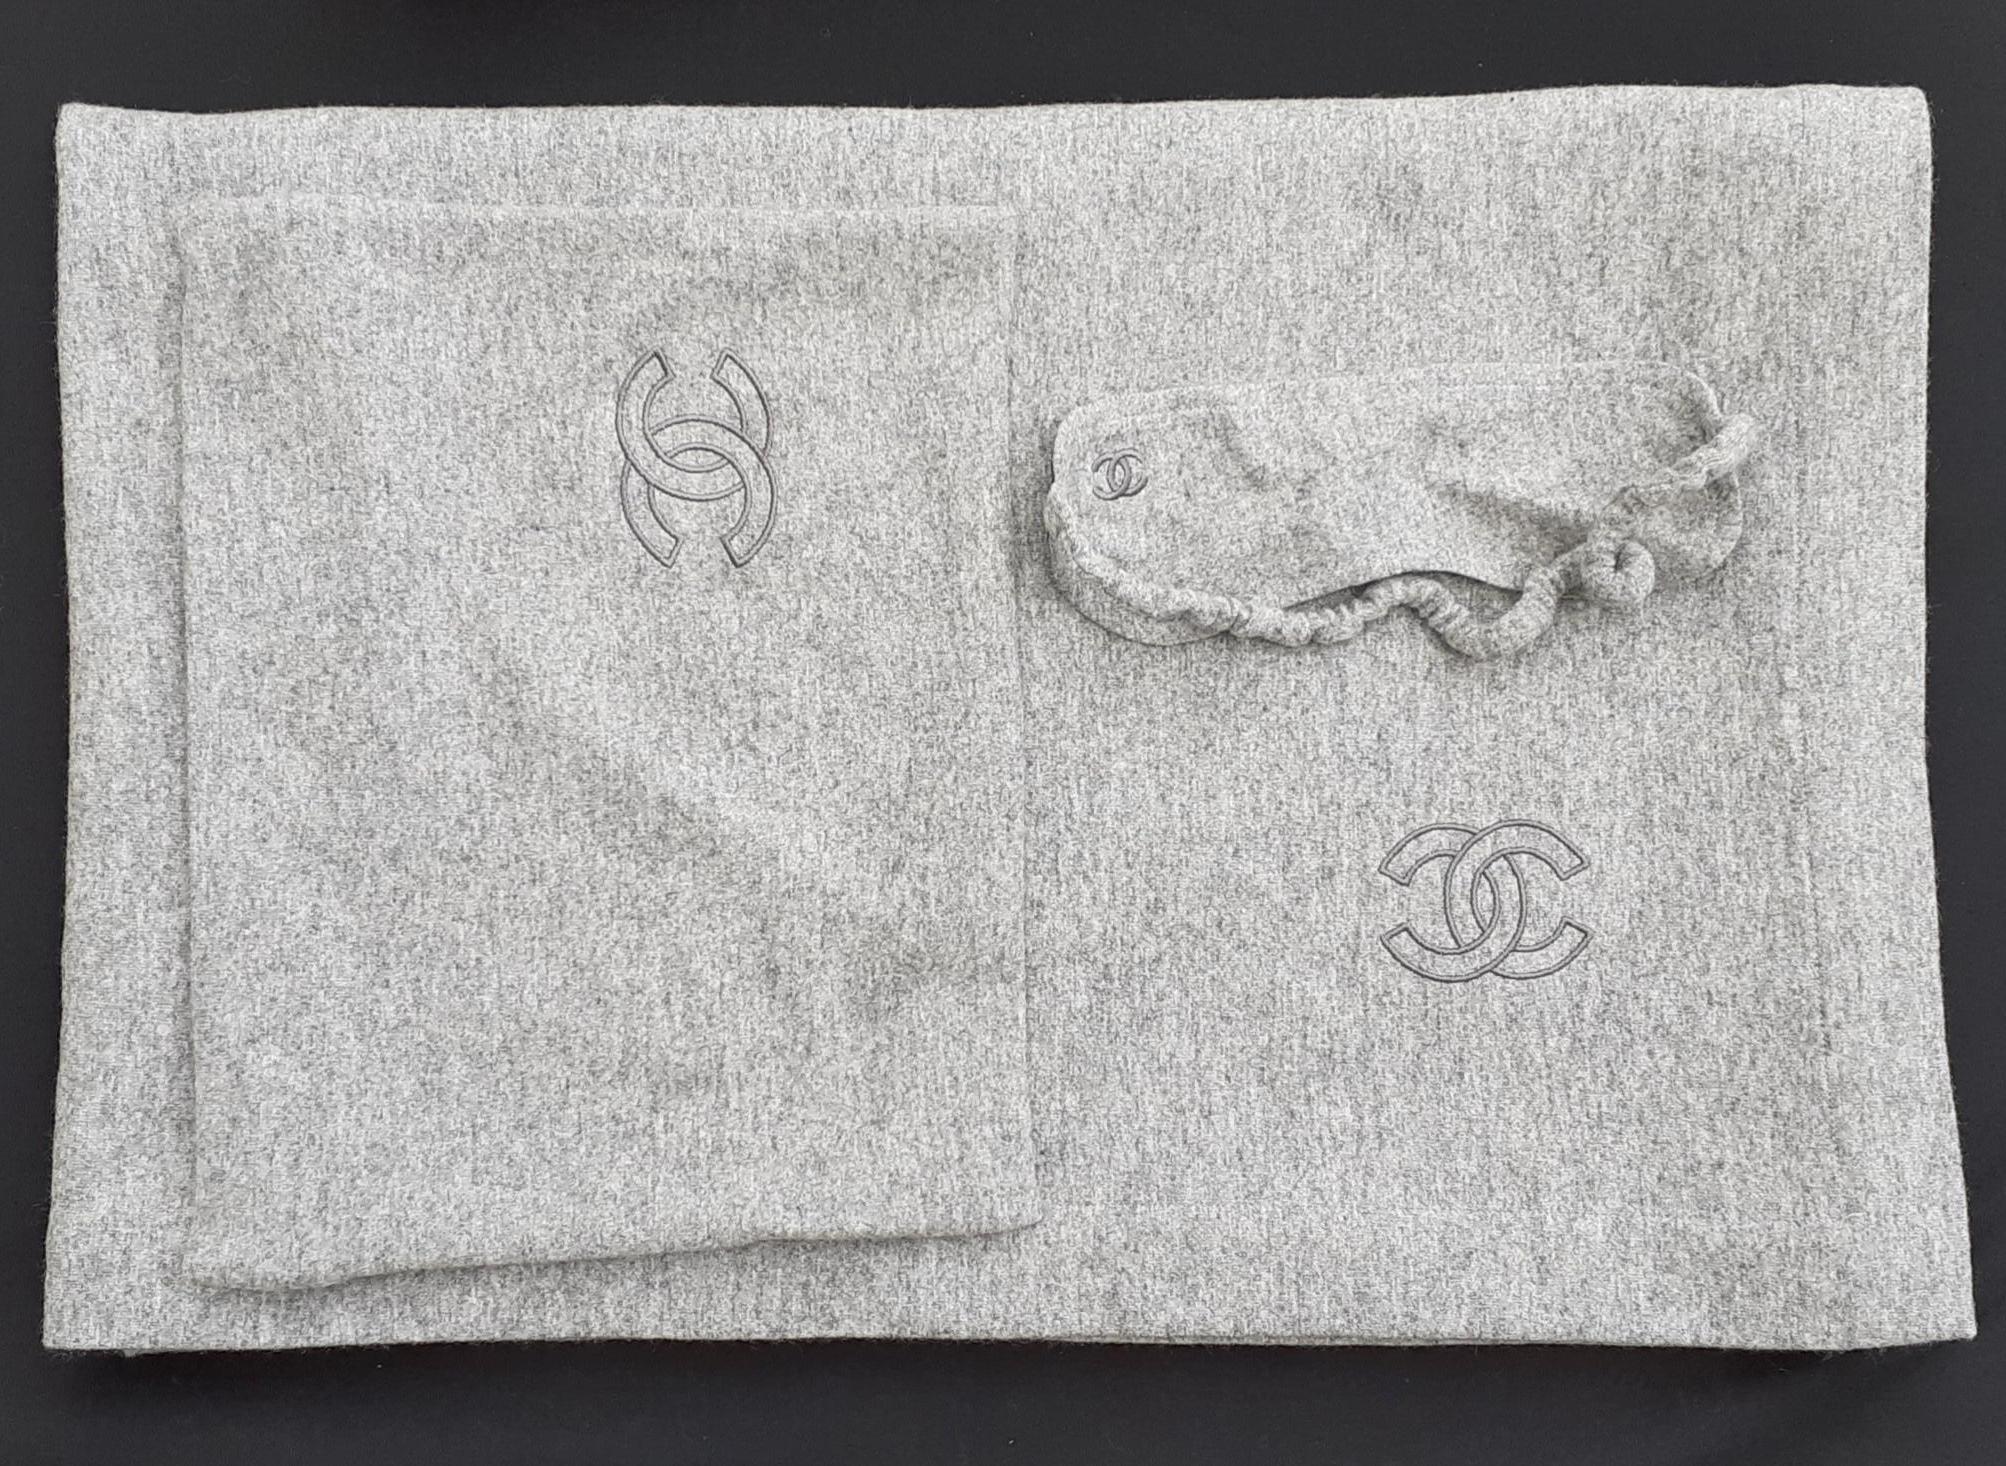 Beautiful Authentic CHANEL Travel Set

3 pièces: Pouch, Blanket, Eye Mask

The pouch can be used to store the blanket or your personal effects

Made of 50% Cashmere, 50% Wool

Eye mask is lined with black Silk

Colorway: Gray

